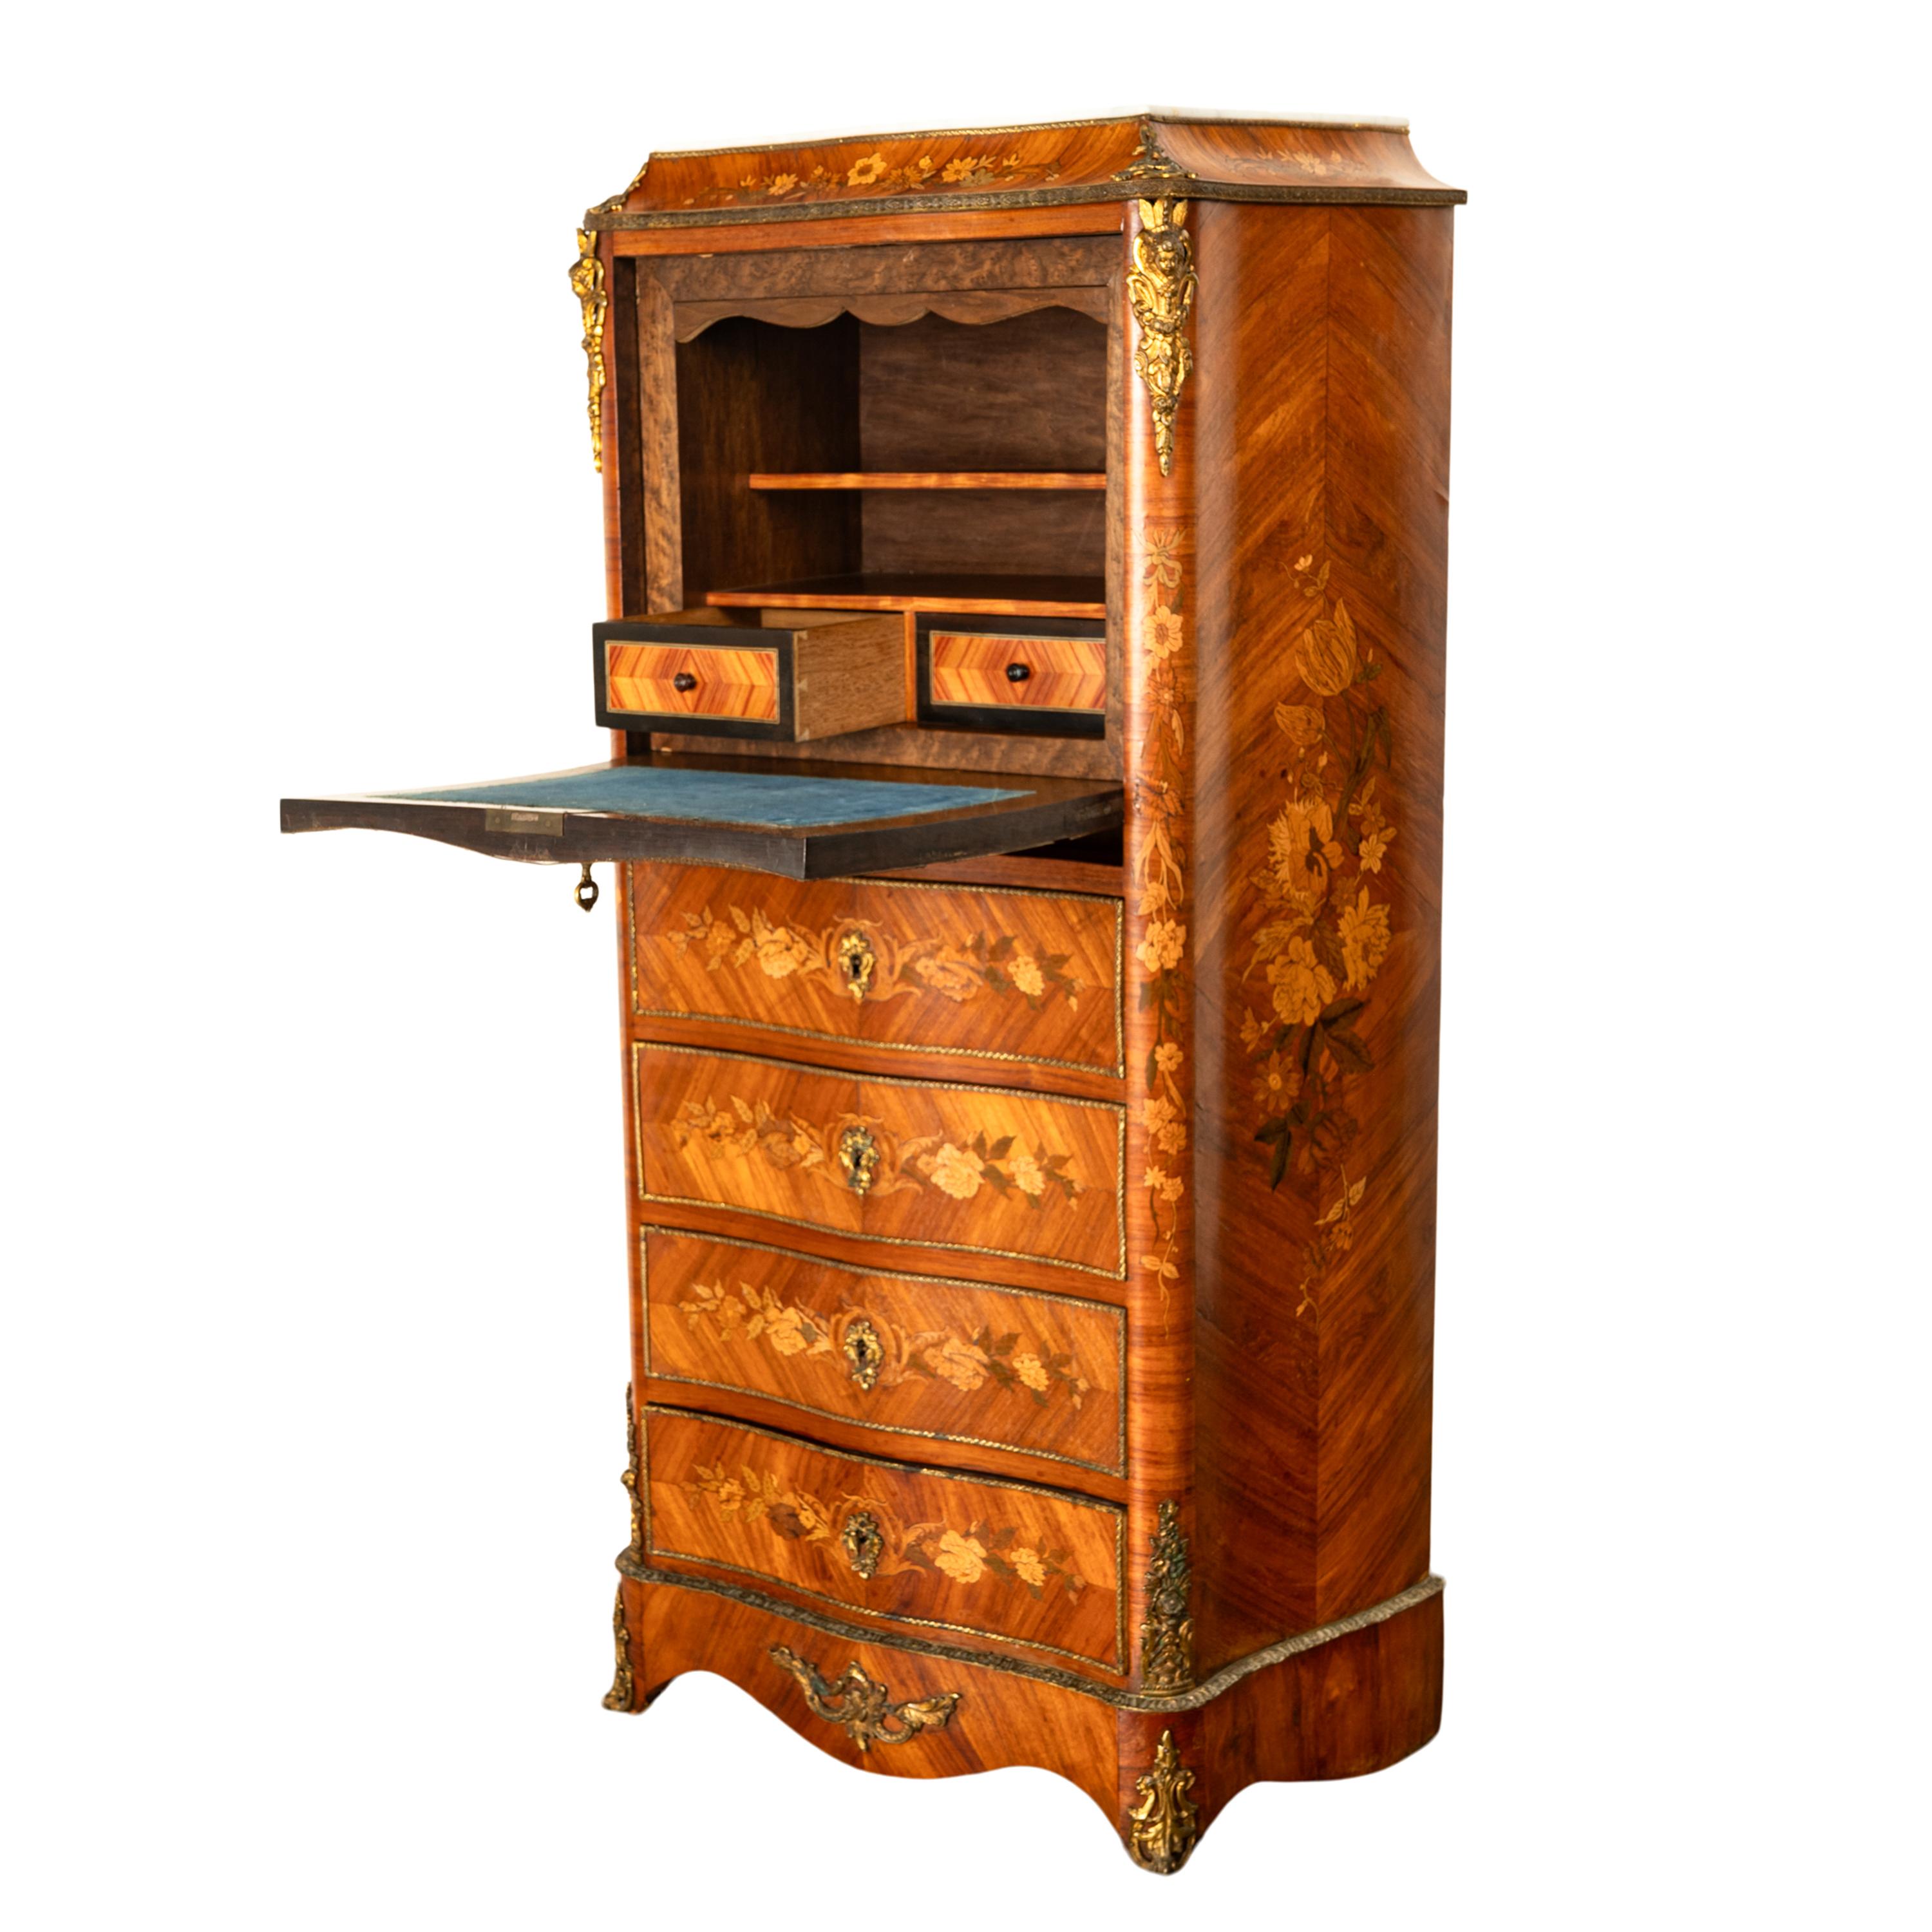 Fine Antique French Louis XV Marquetry Rosewood Ormolu Secretaire Abattant 1880 For Sale 2